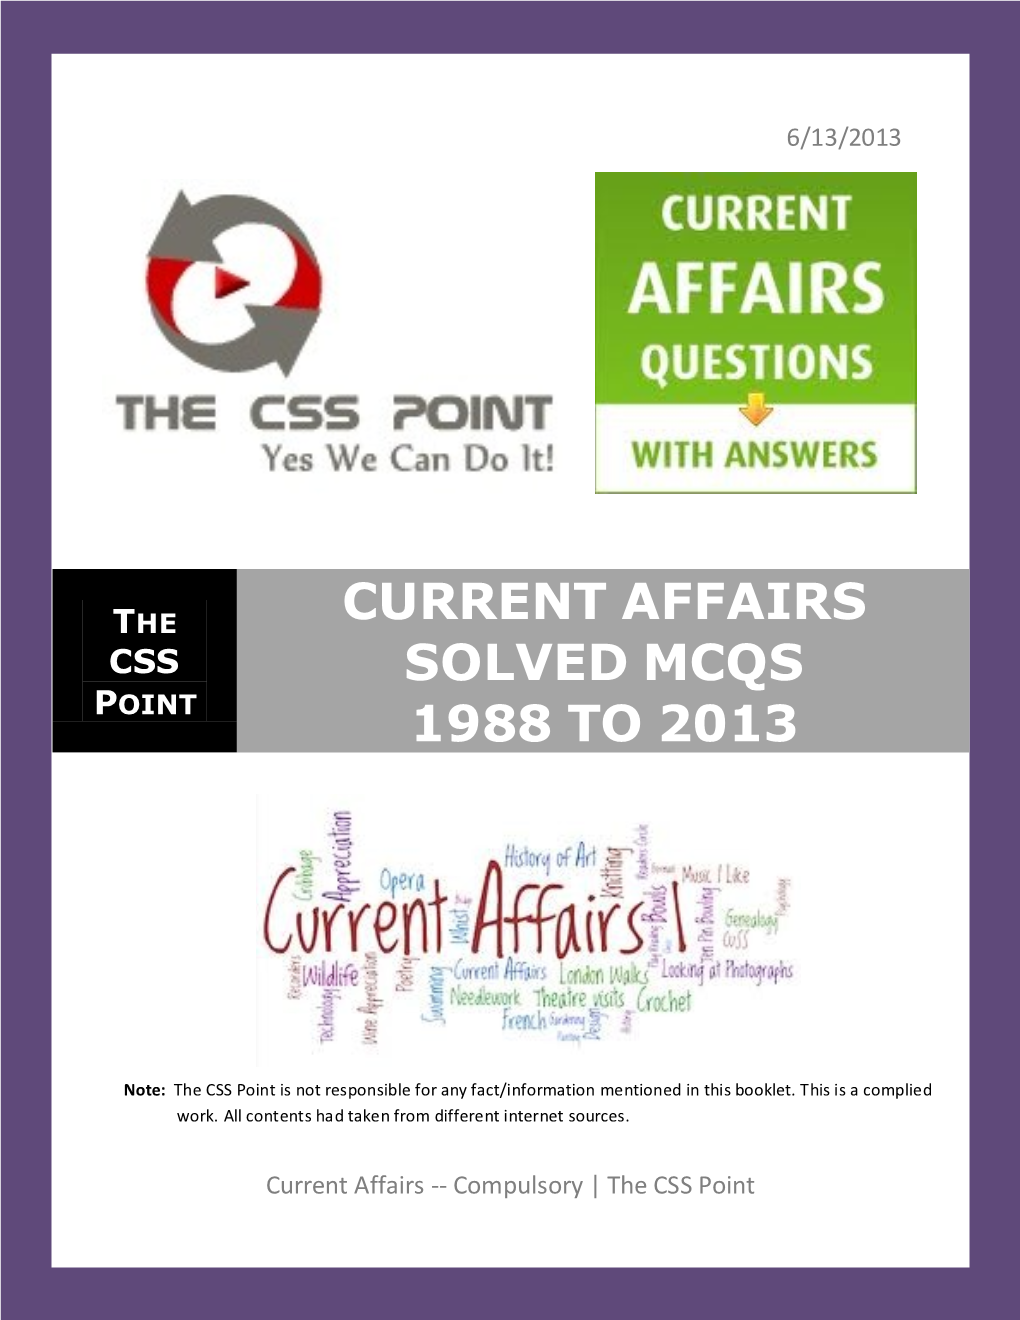 Current Affairs Solved Mcqs 1988 to 2013